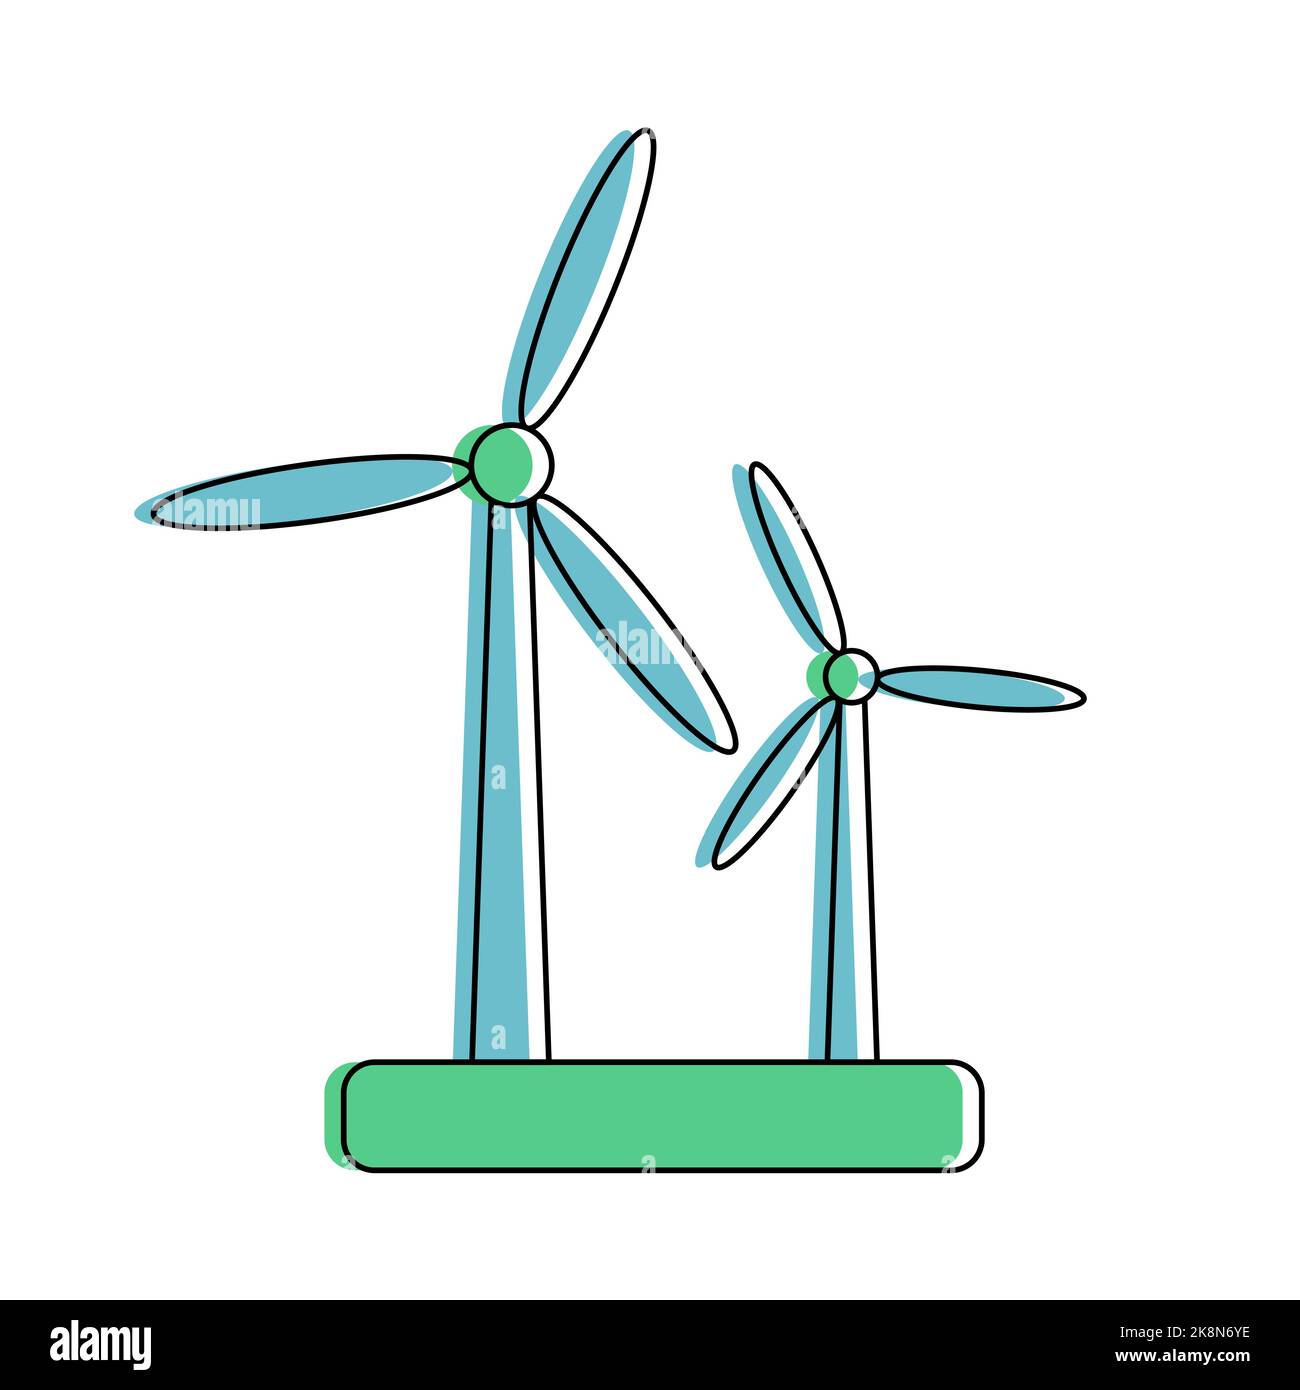 Flat wind turbine icon. Green energy wind power sign isolated on white background. Vector illustration. Stock Vector